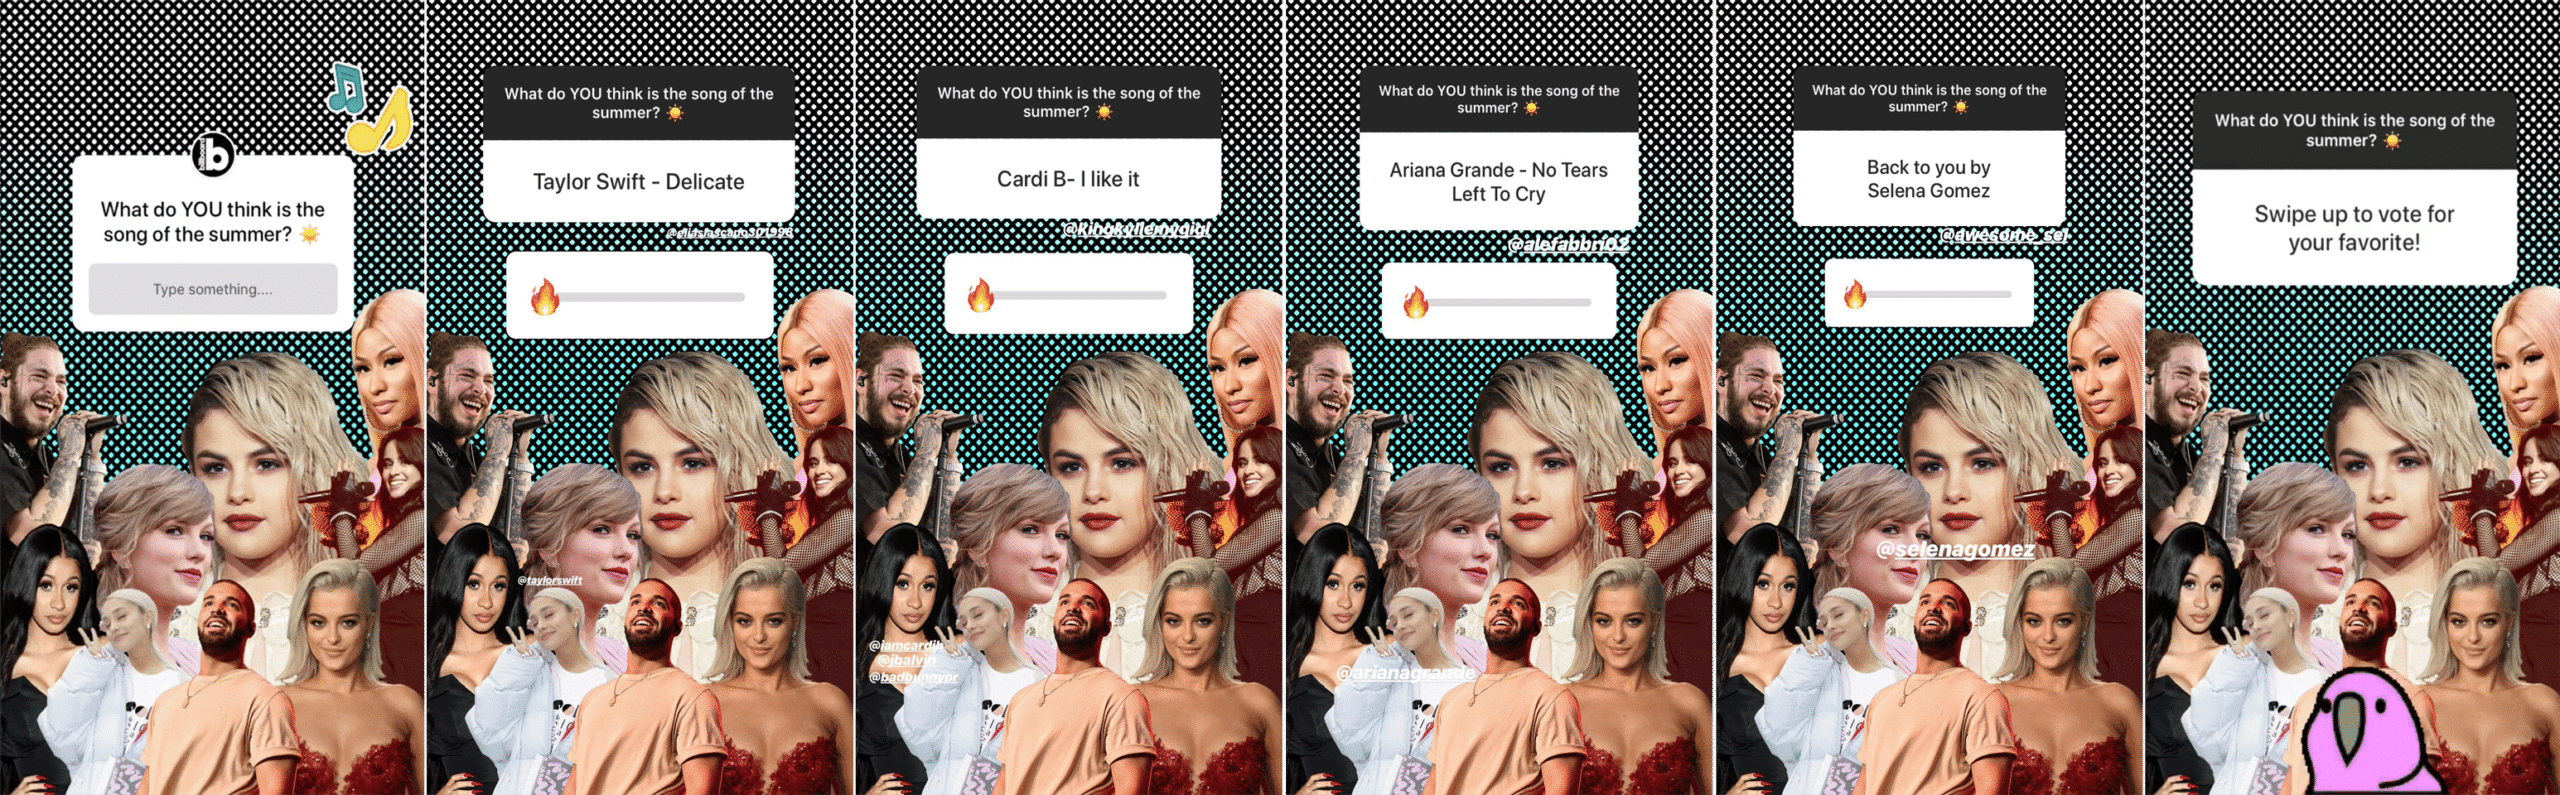 Billboard - Song Of The Summer Question And Polls Ig Story Compiled Shots.